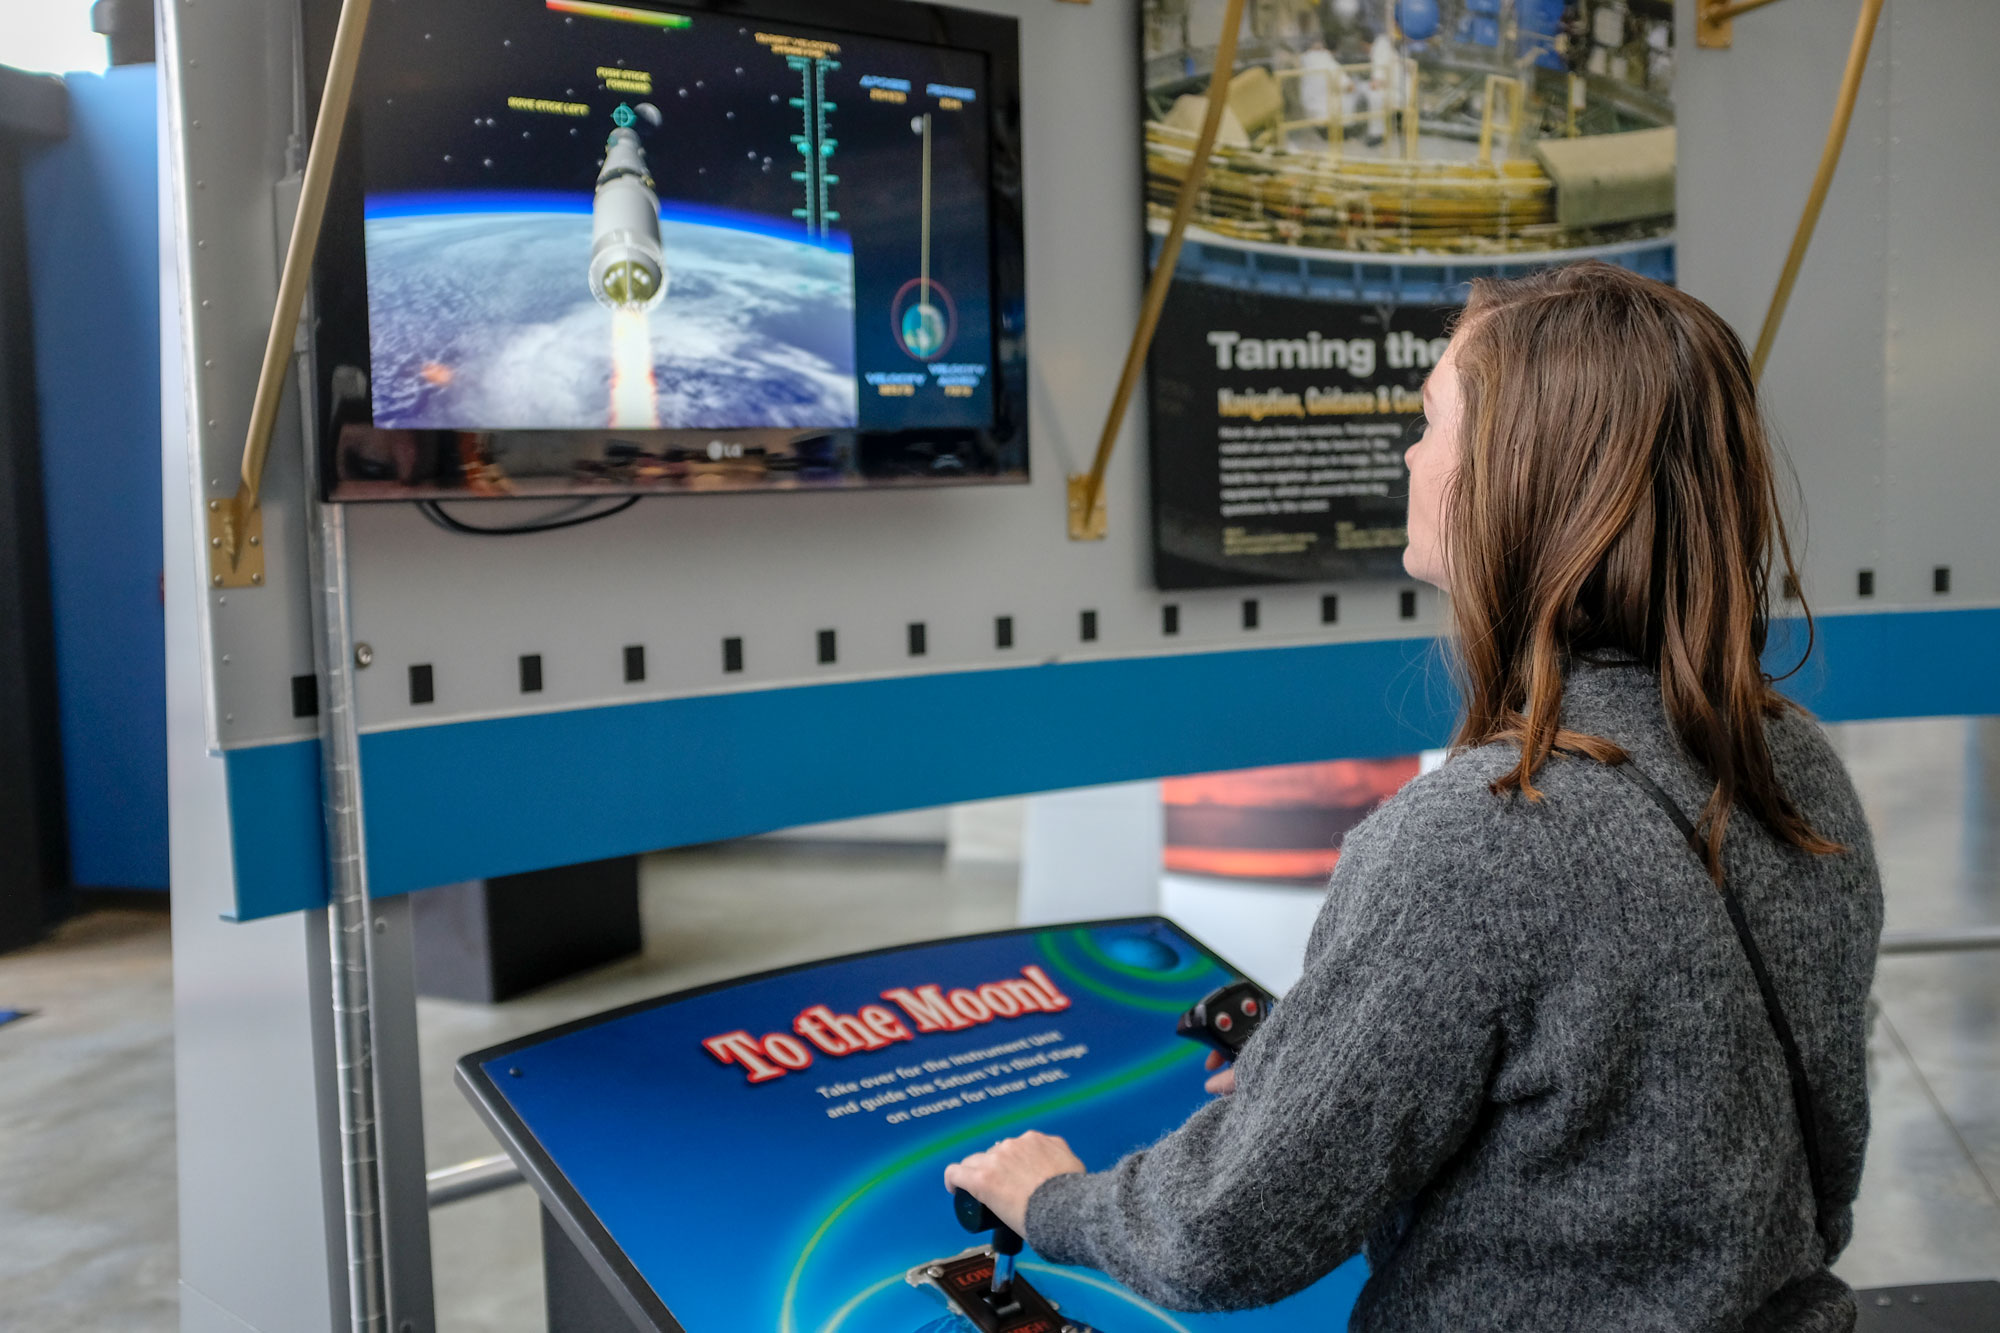 Alyssa fiddles with an interactive exhibit at the U.S. Space & Rocket Center